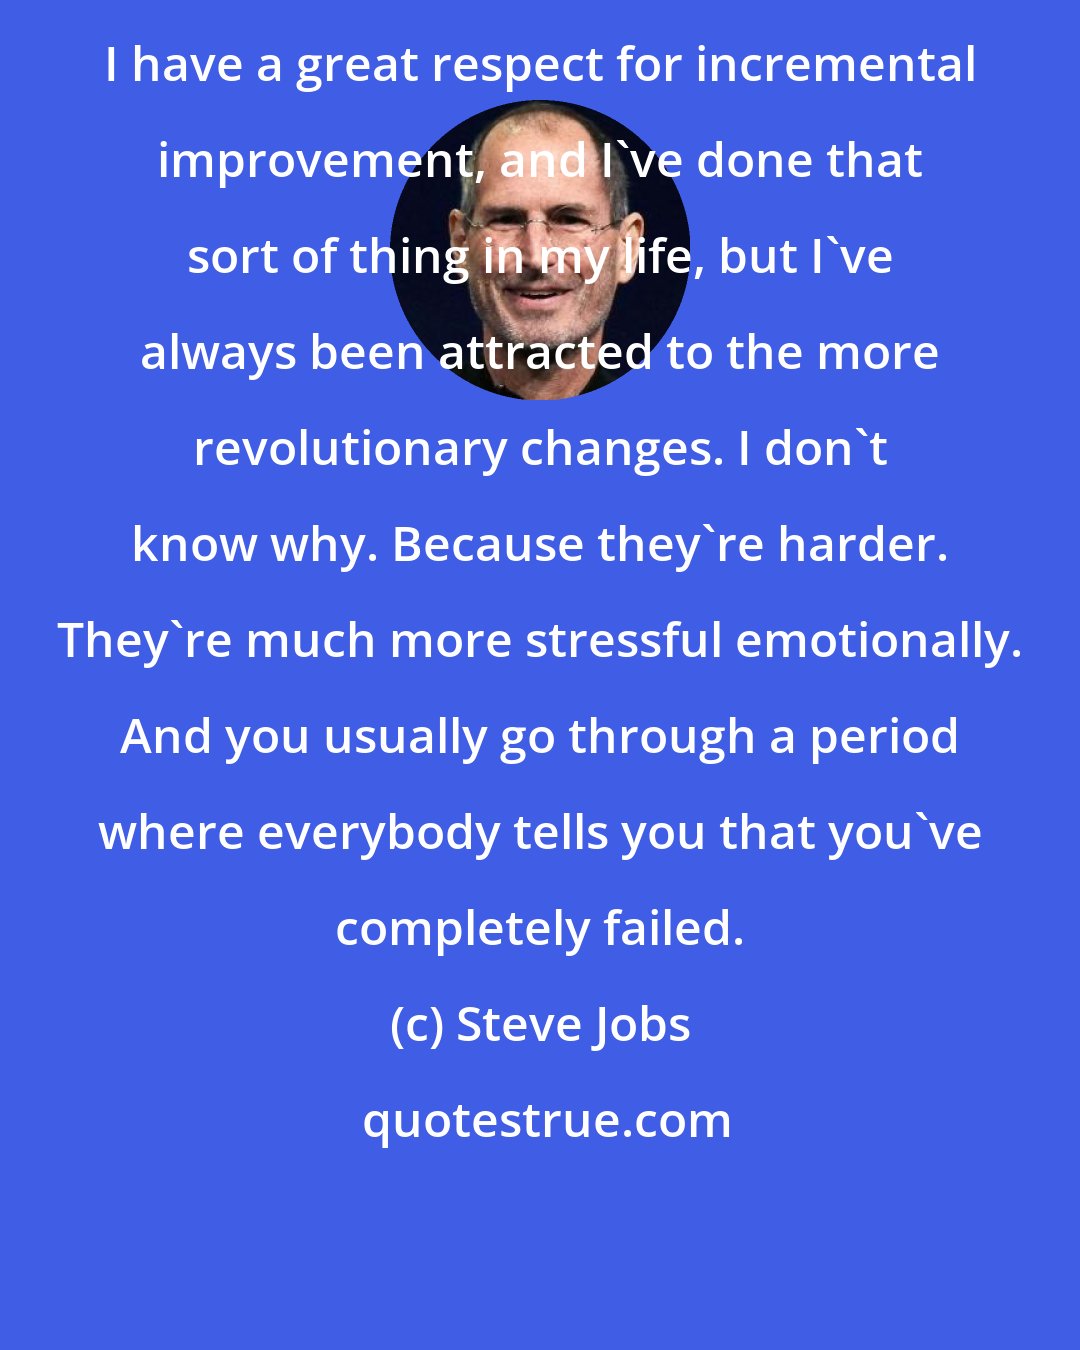 Steve Jobs: I have a great respect for incremental improvement, and I've done that sort of thing in my life, but I've always been attracted to the more revolutionary changes. I don't know why. Because they're harder. They're much more stressful emotionally. And you usually go through a period where everybody tells you that you've completely failed.